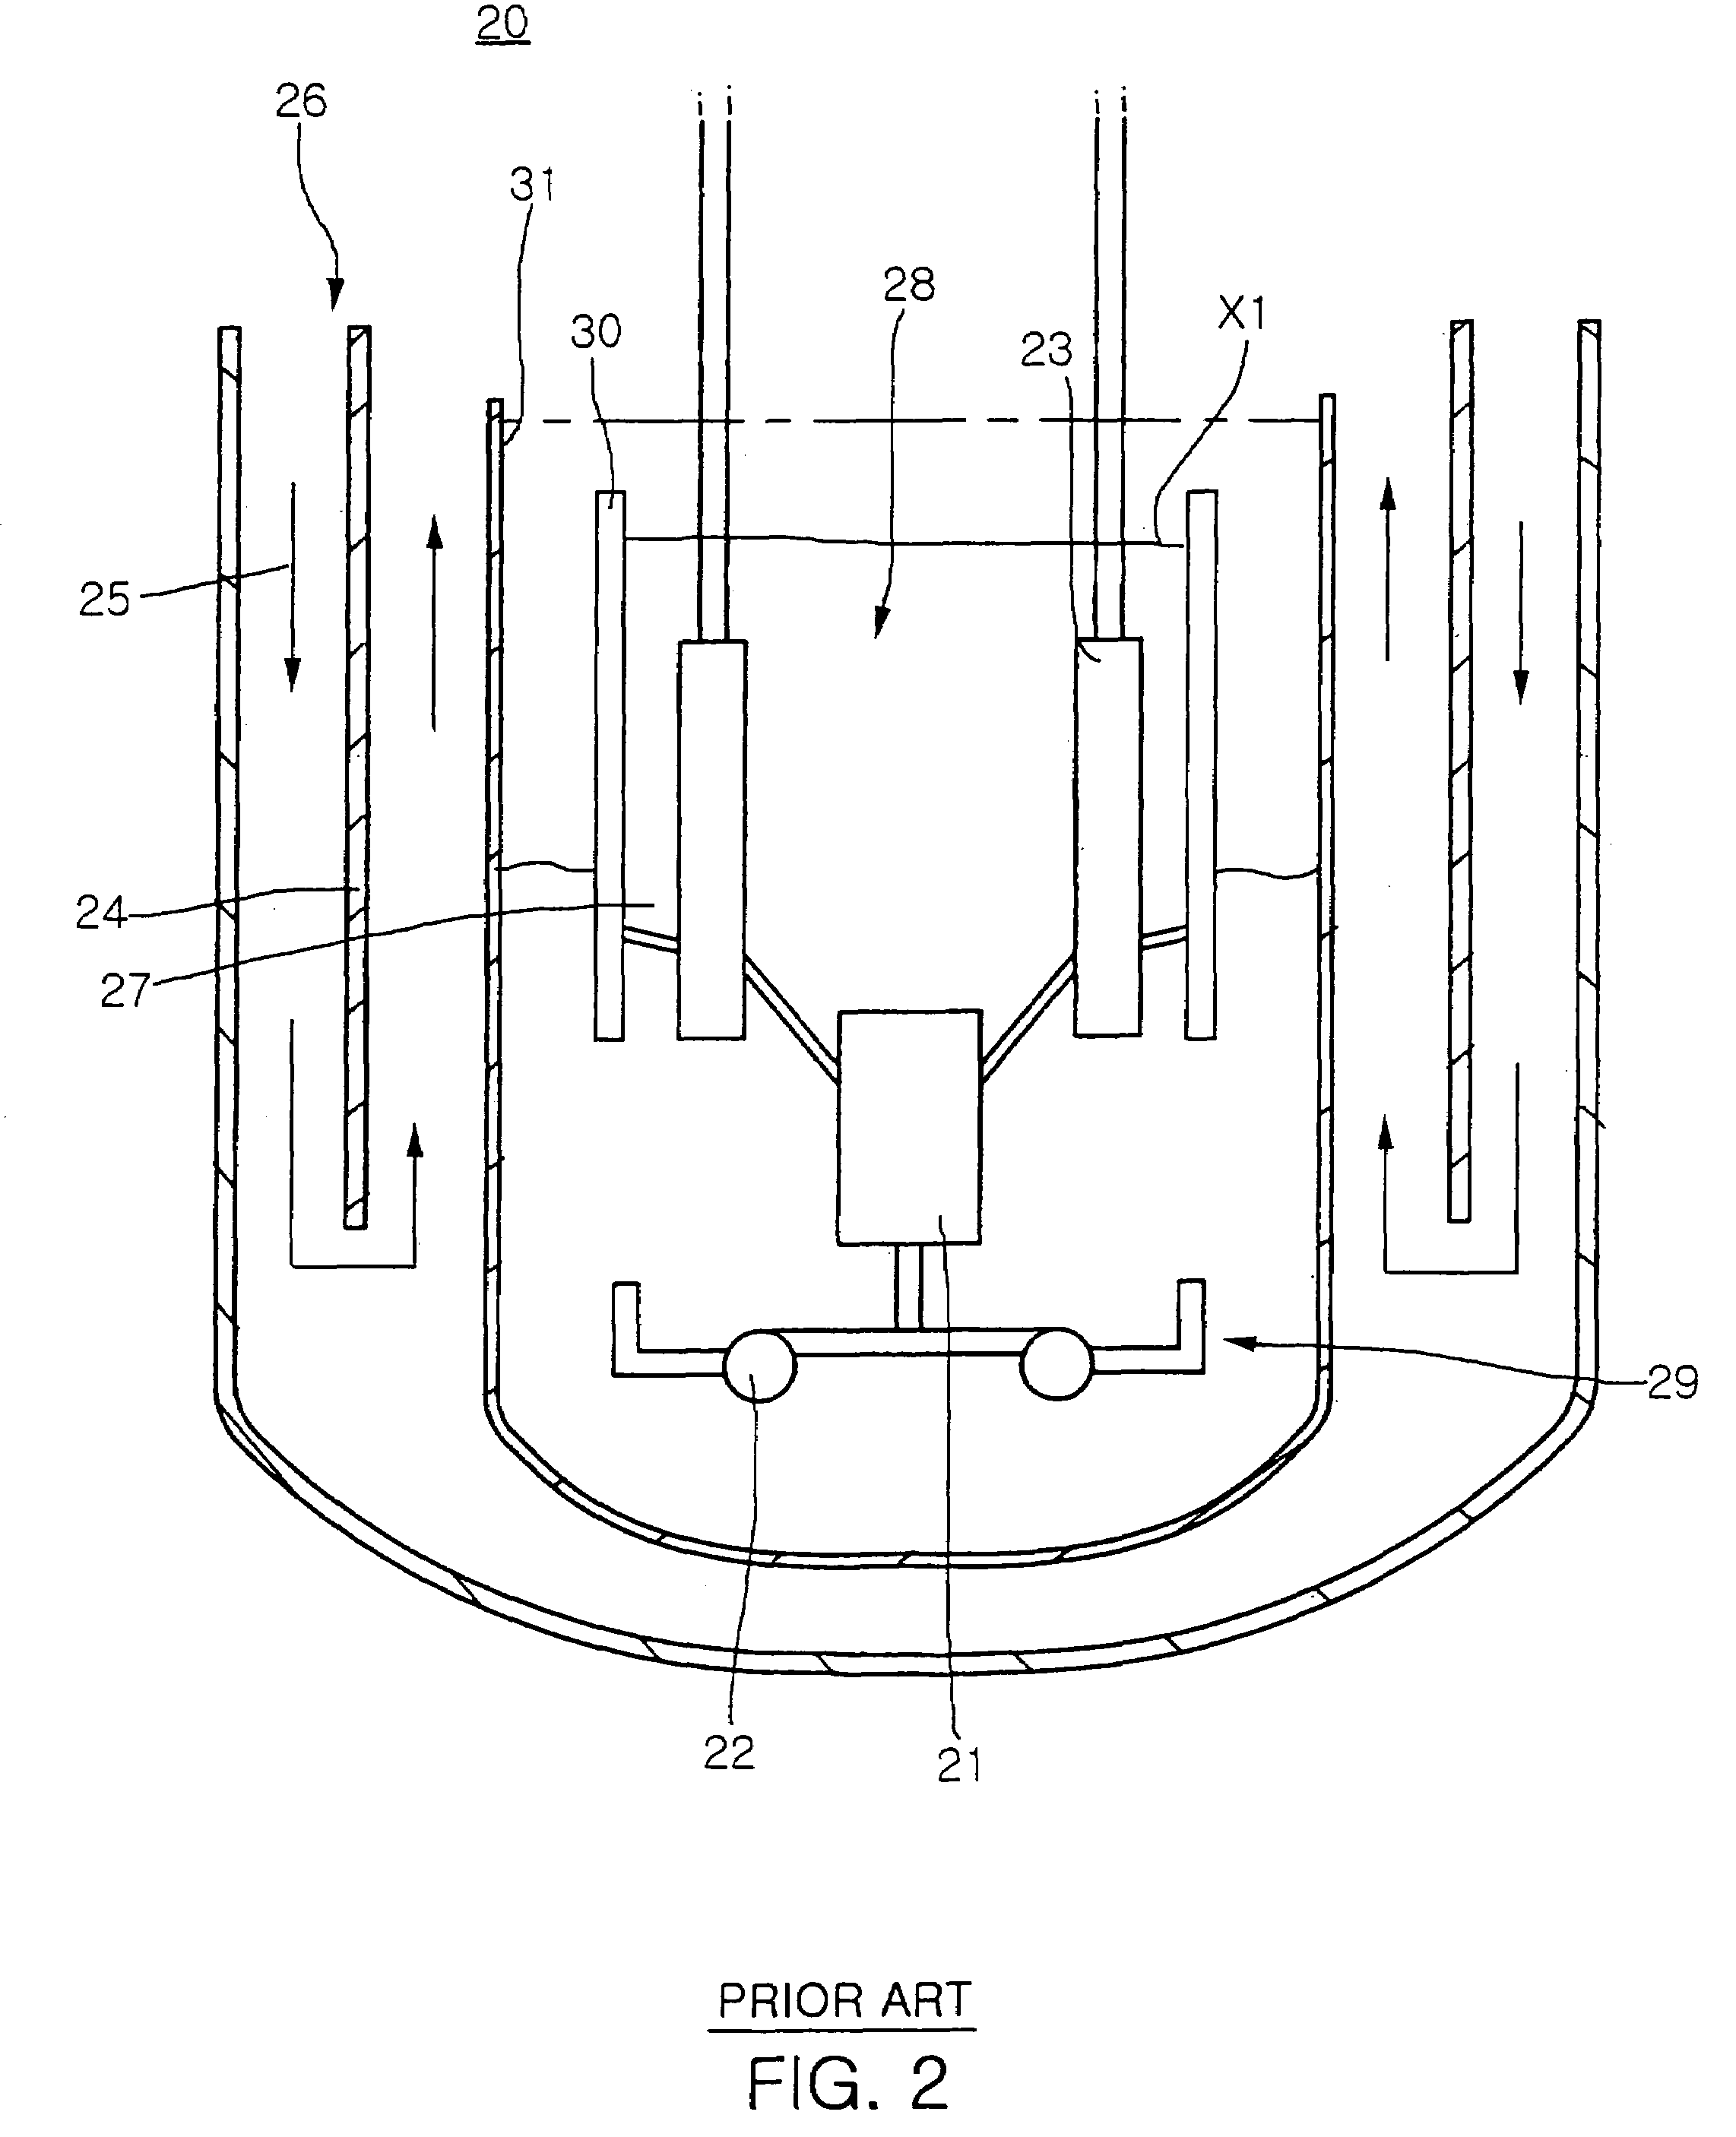 Stable and passive decay heat removal system for liquid metal reactor